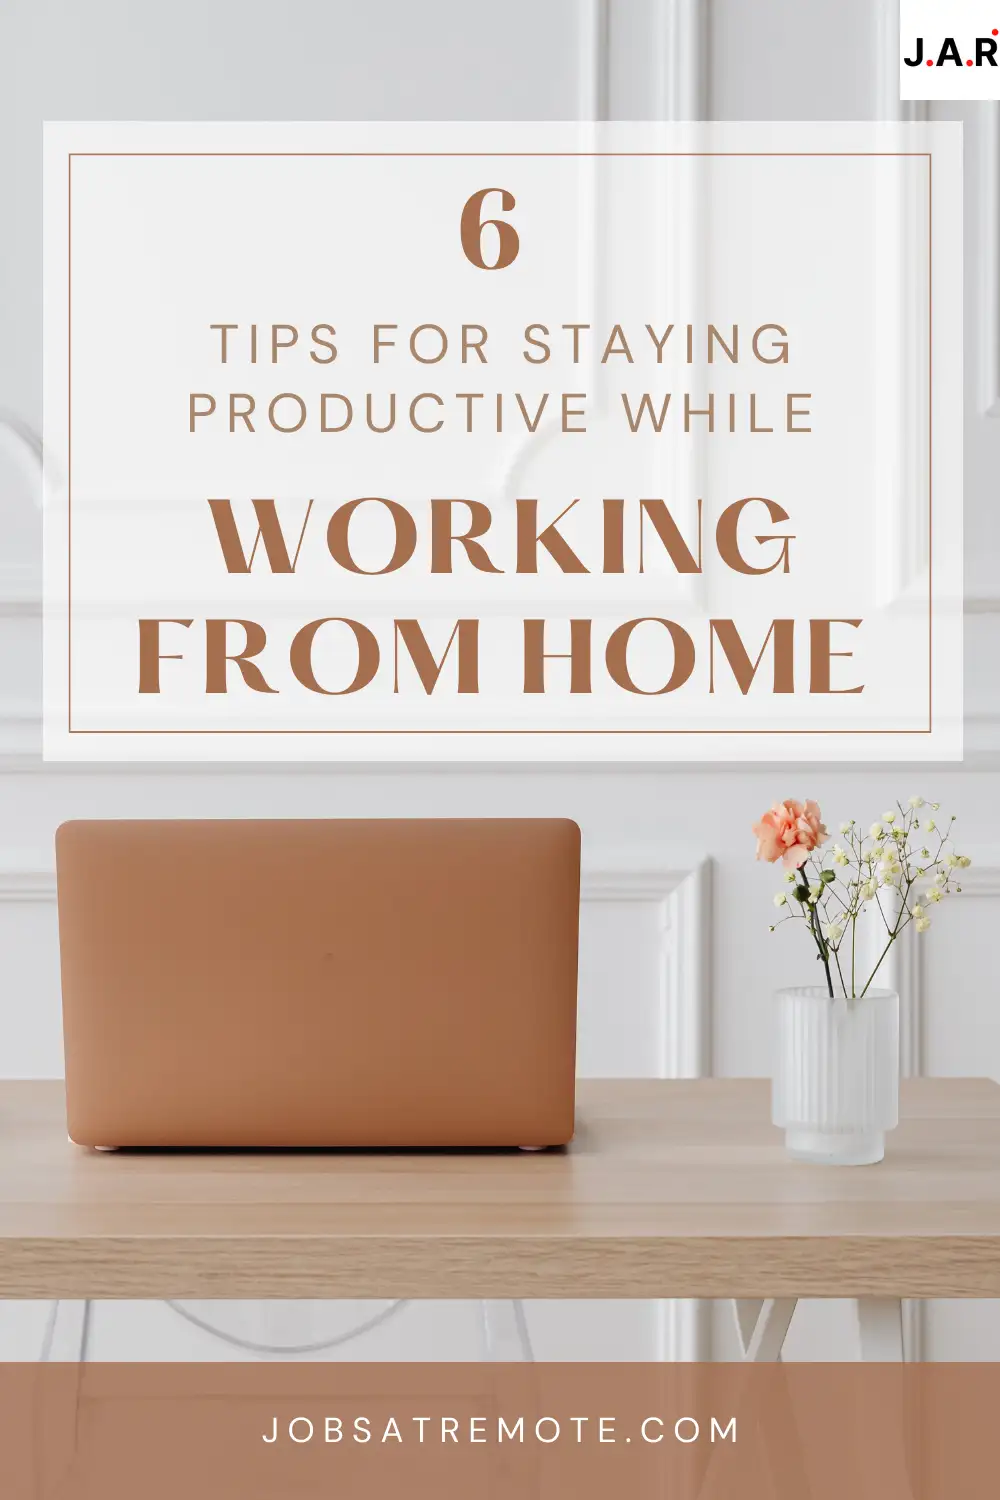 Tips For Staying Productive While Working From Home